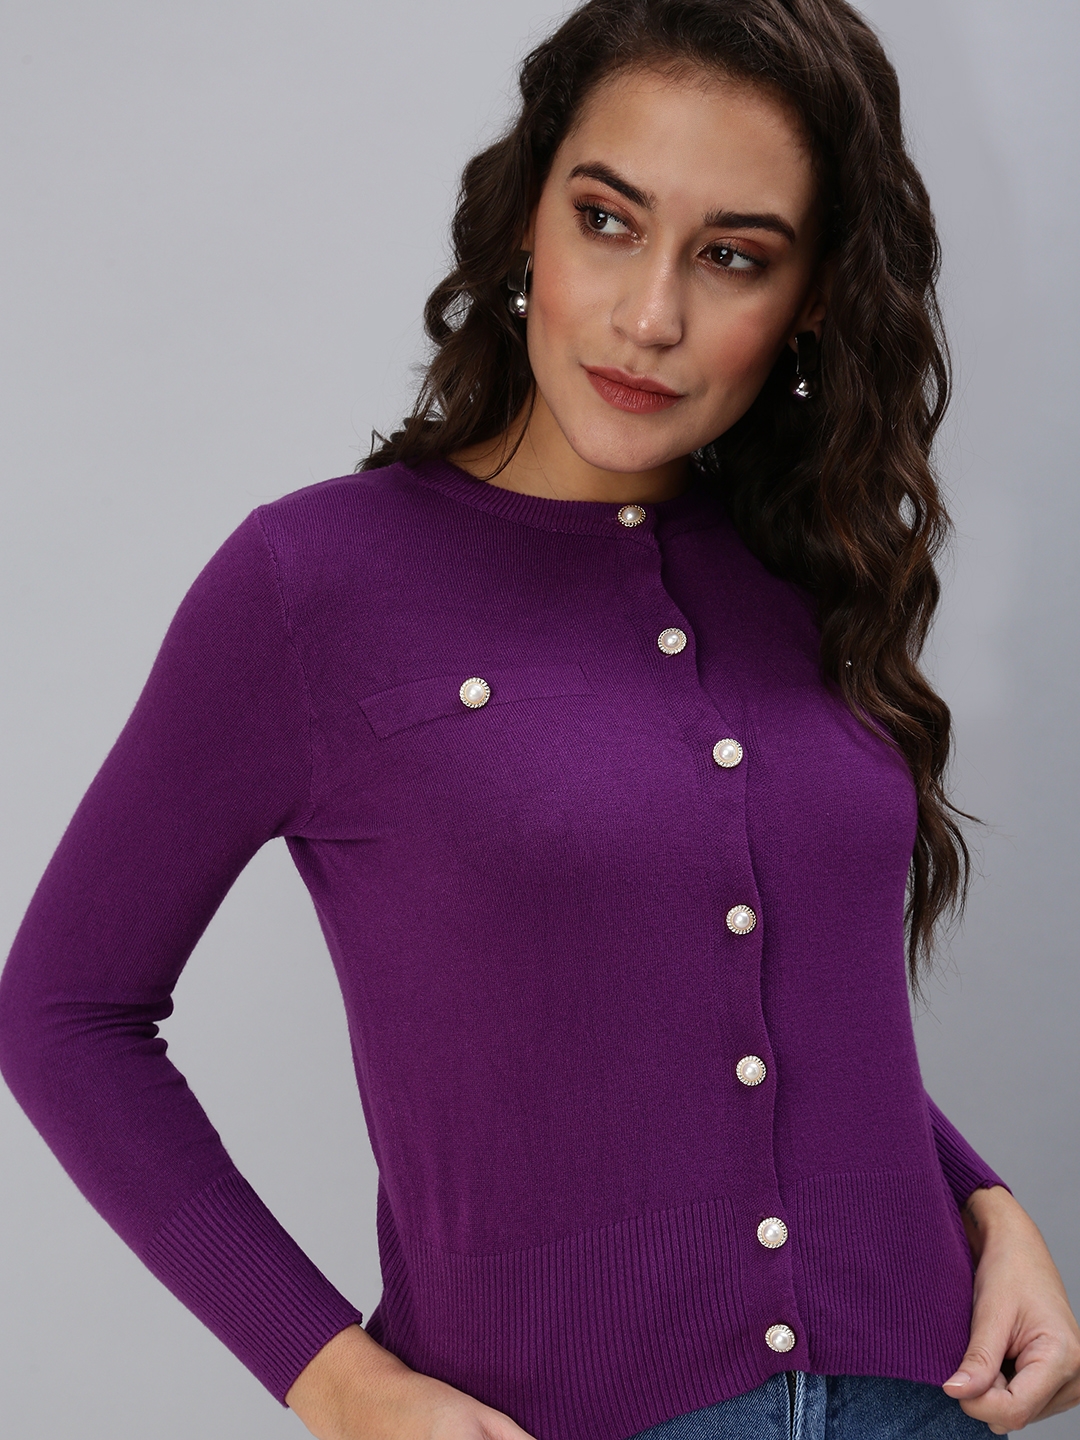 SHOWOFF Women's Solid Fitted Purple Round Neck Top